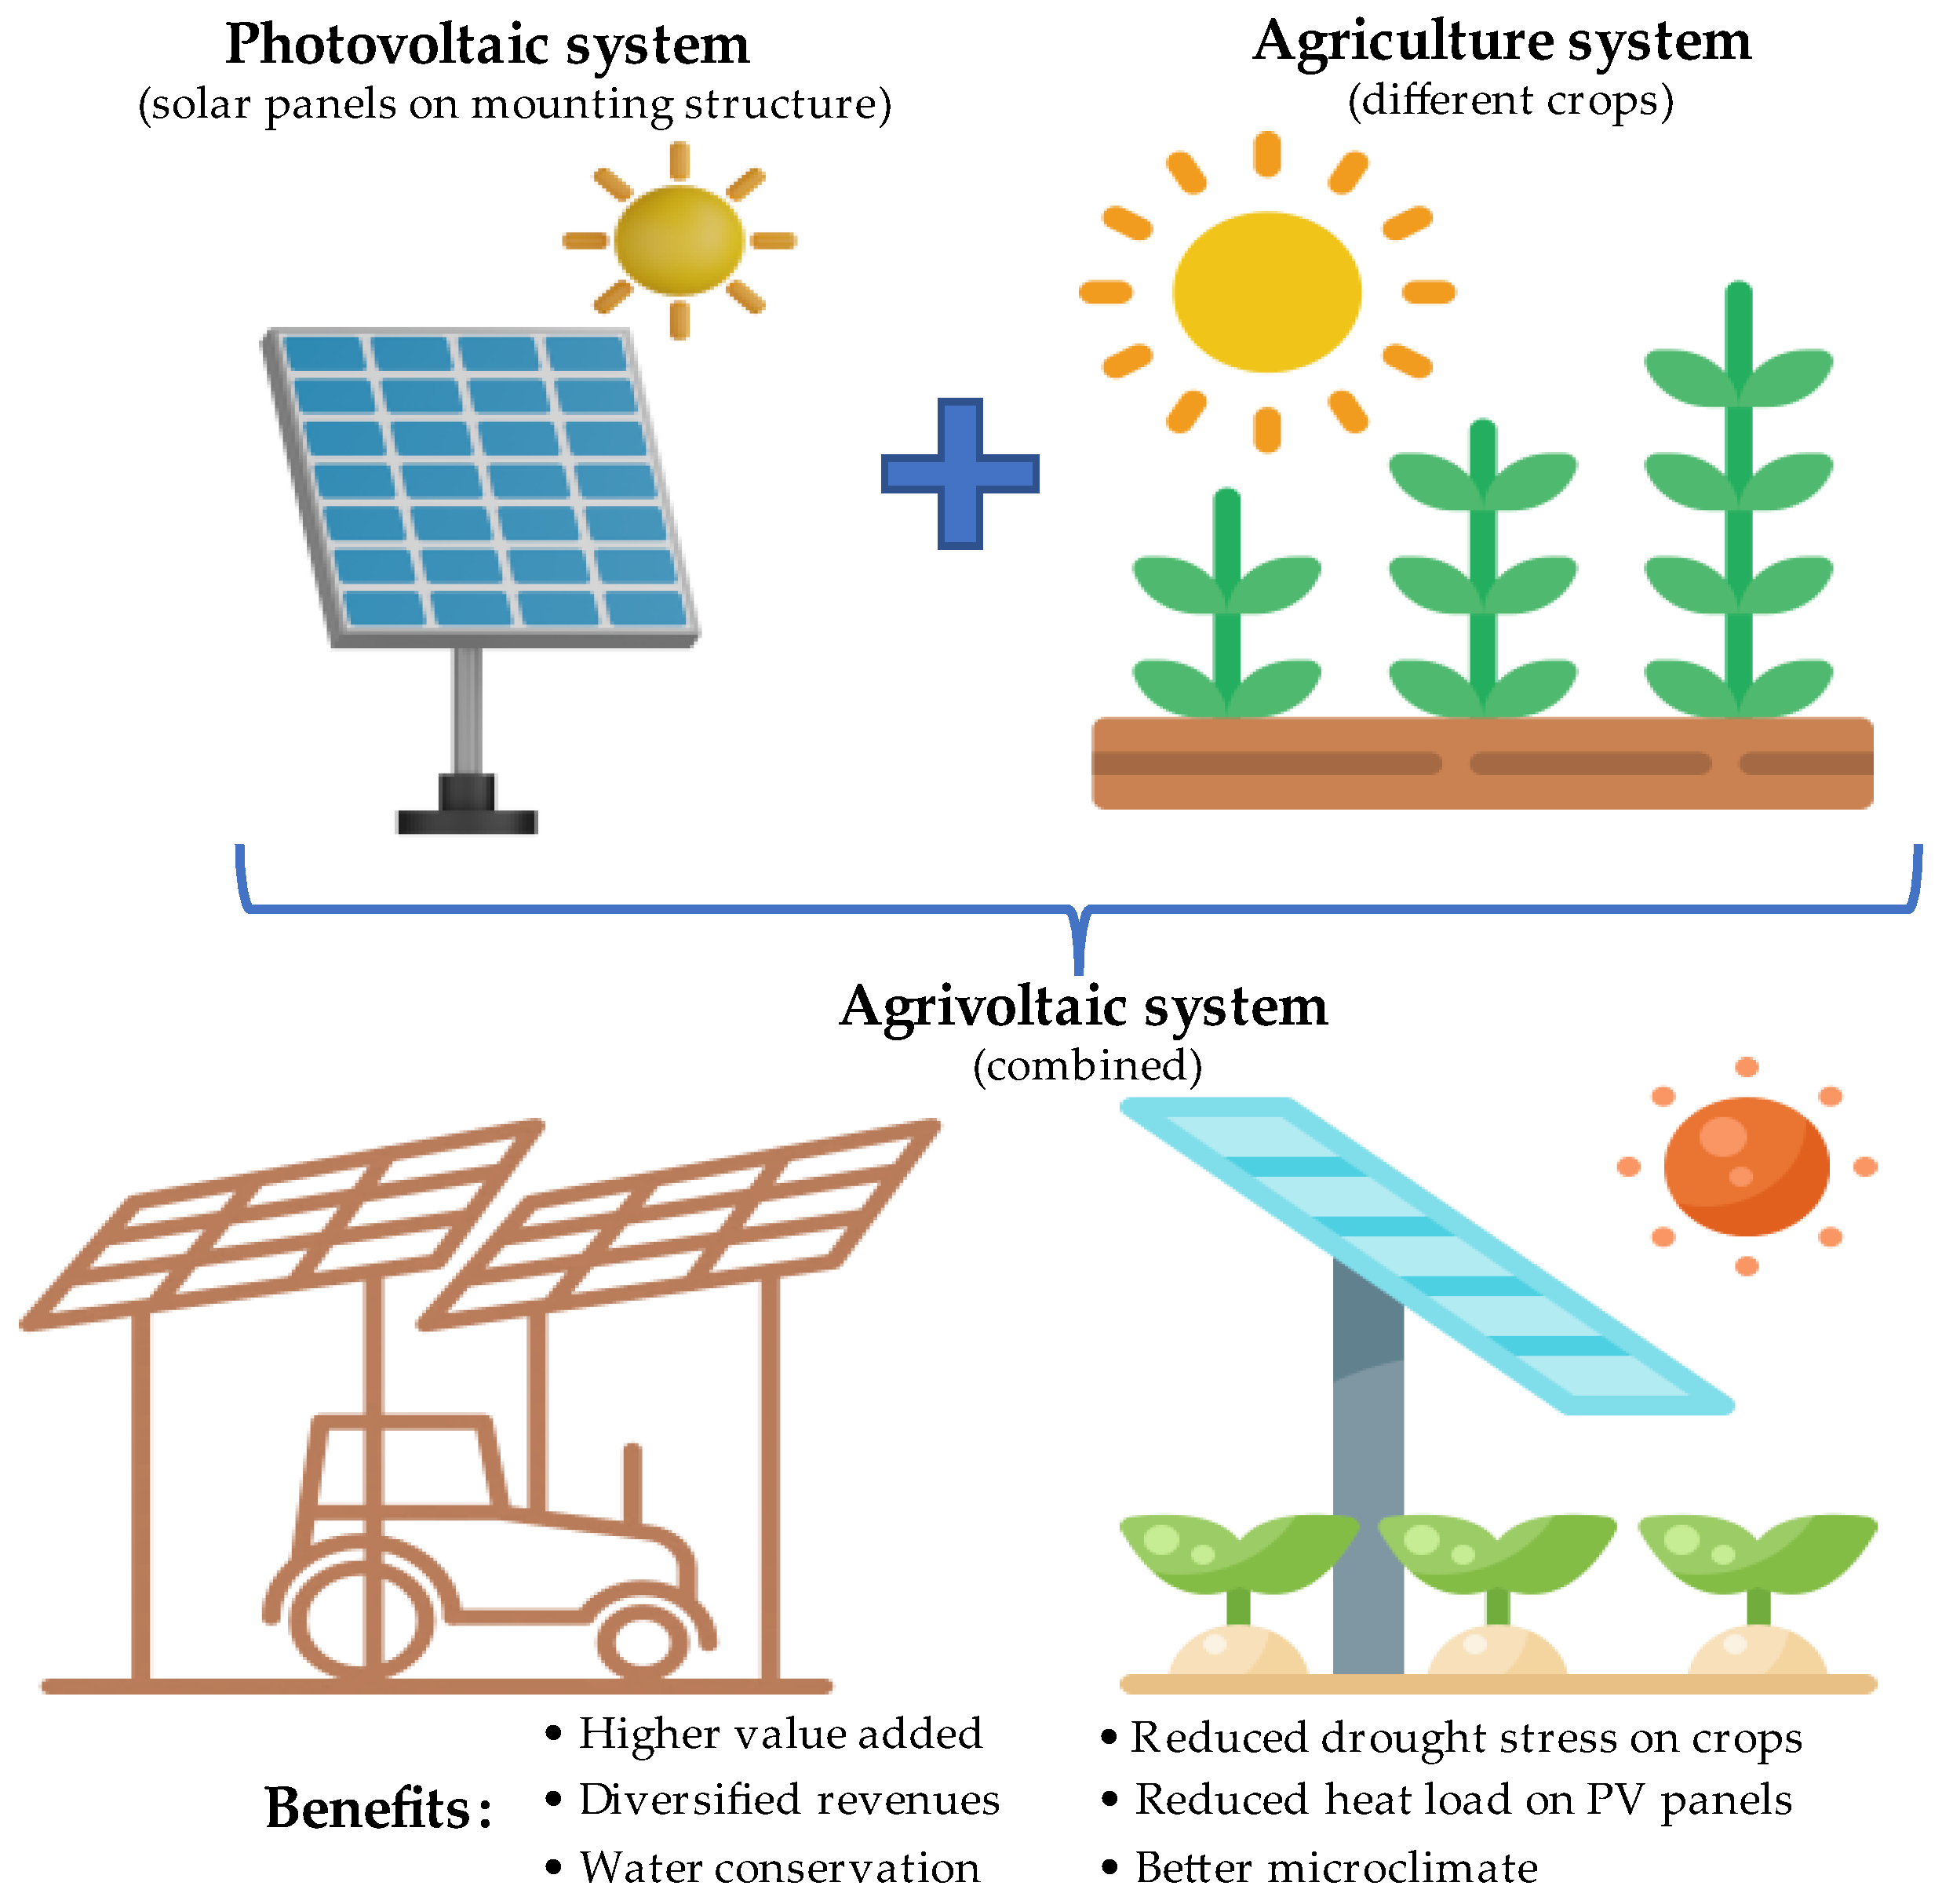 a review of research on agrivoltaic systems